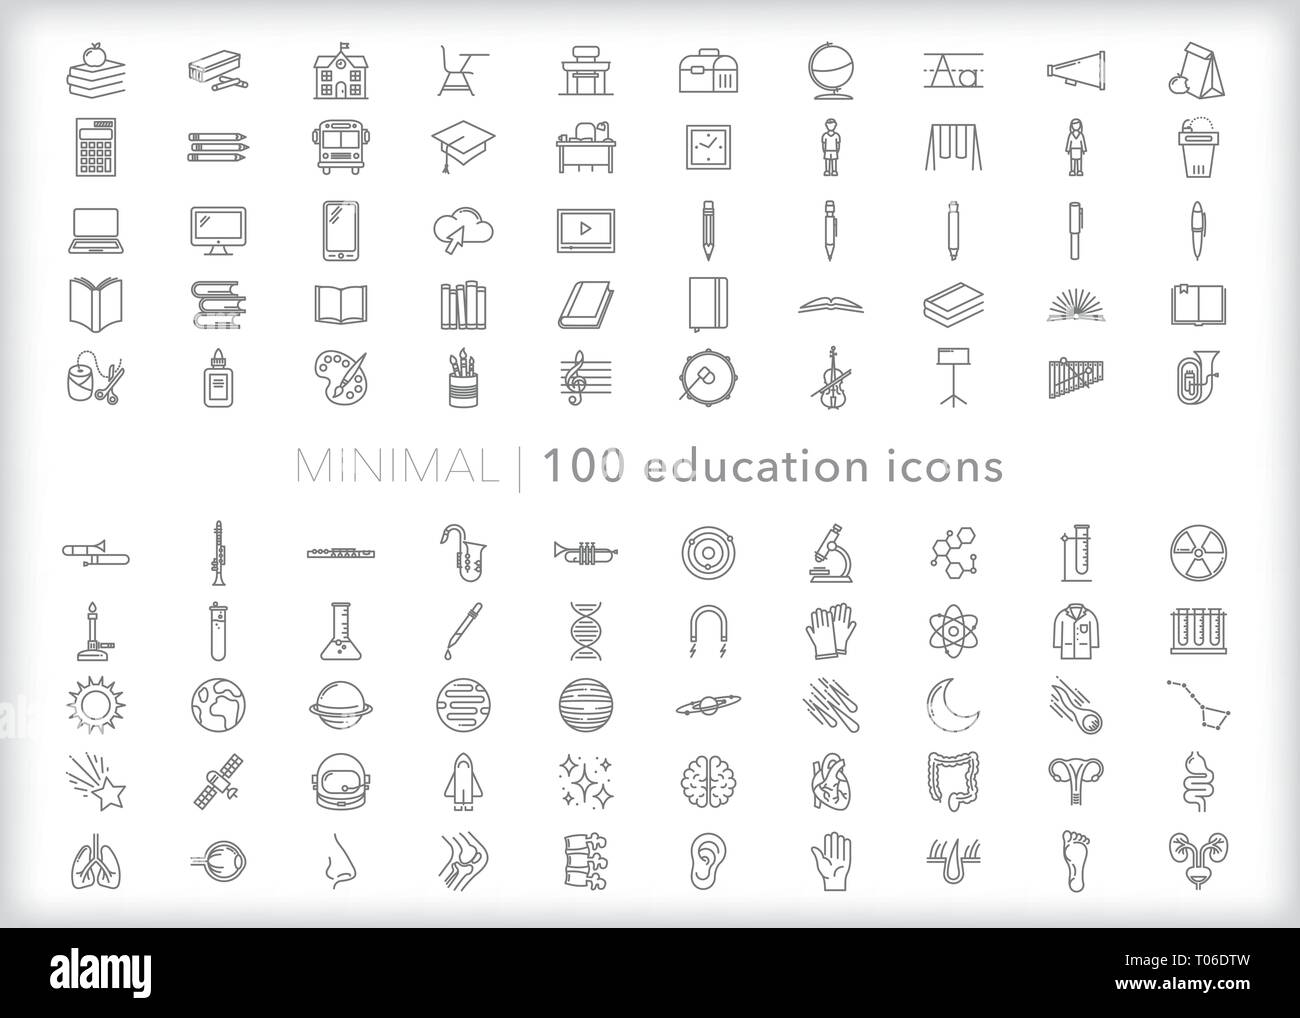 Set of 100 education line icons of school supplied and subjects to learn in school Stock Vector